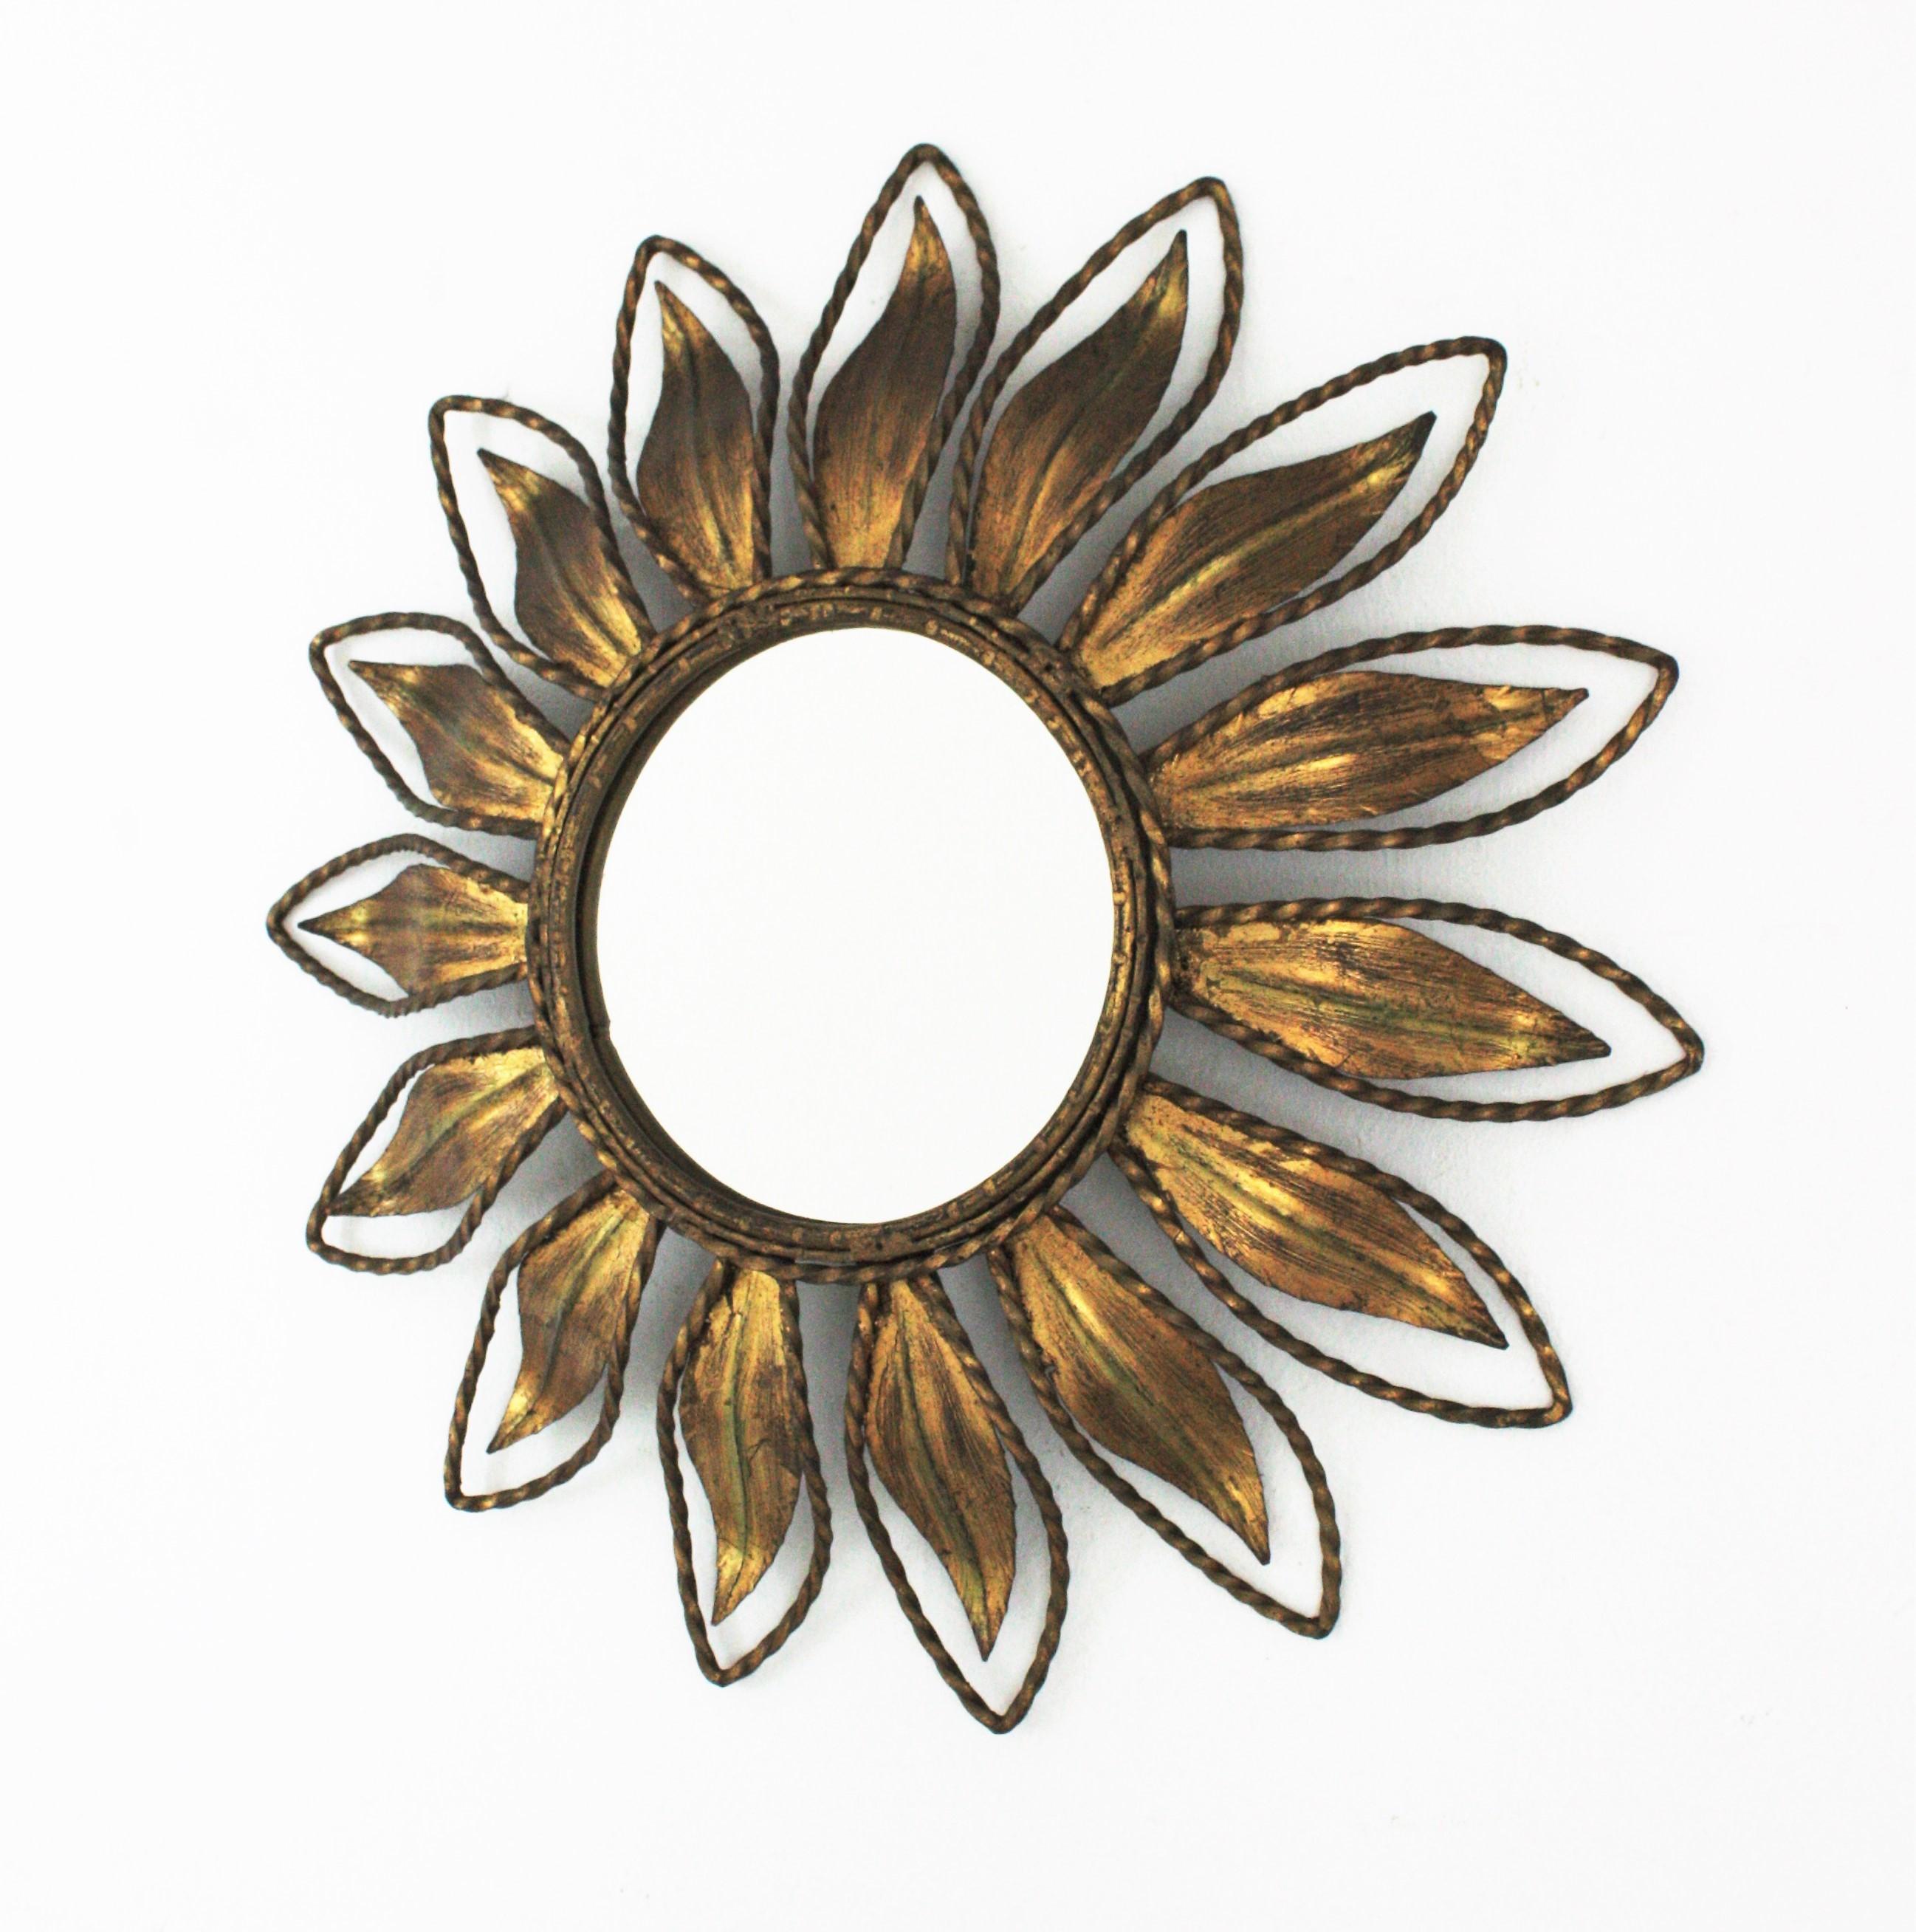 A beautiful gilt wrought iron leafed sunburst mirror with twisting iron rope detailings, Spain, 1960s.
This handcrafted wall mirror features a leafed frame surrounding a round glass. A twisted iron rope surrounds each leaf and the central glass. It